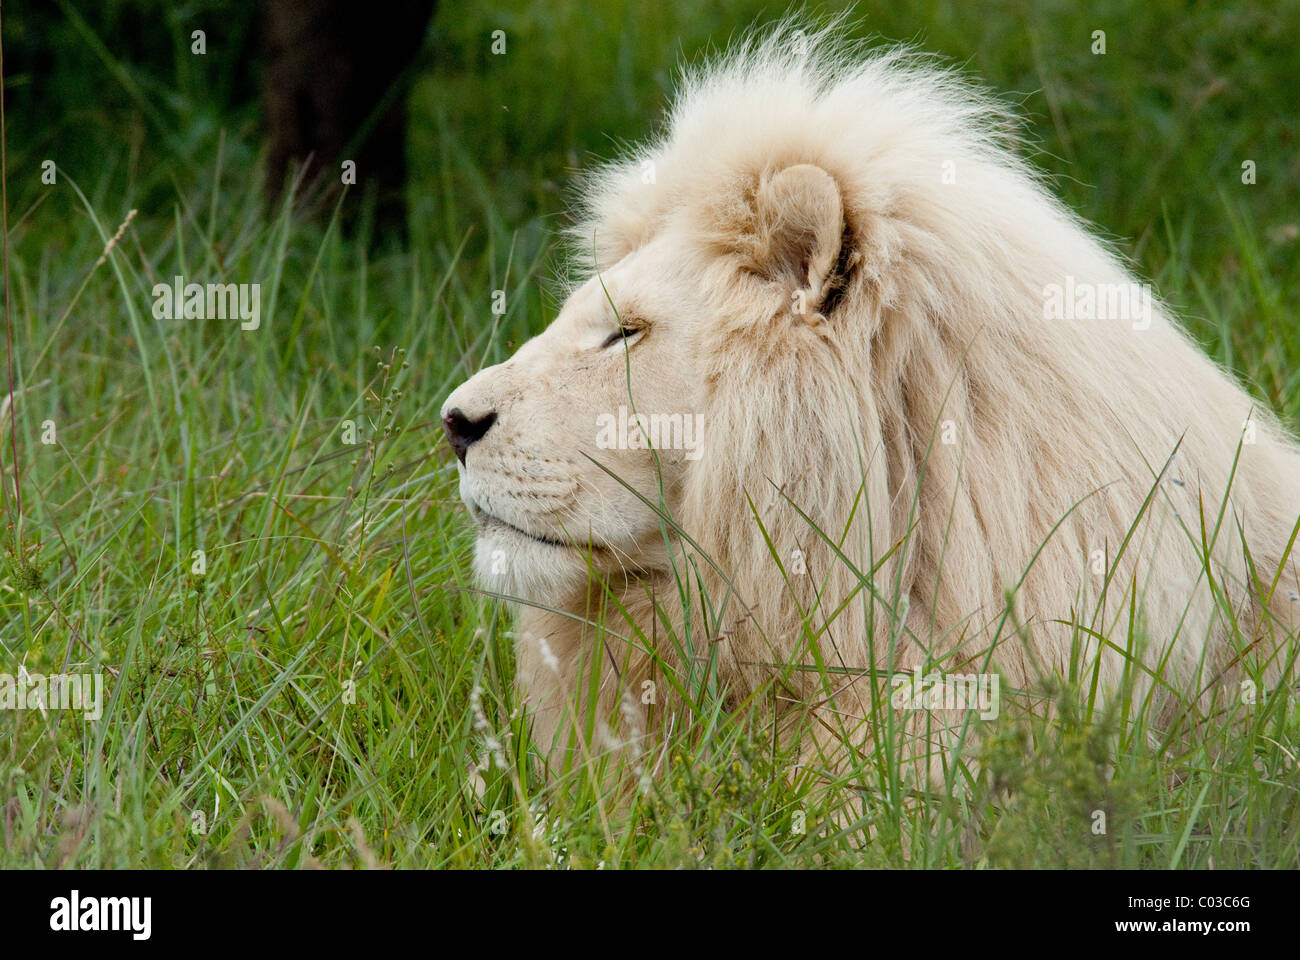 South Africa, East London, Inkwenkwezi Private Game Reserve. African lion (Wild: Panthera leo), unique cream colored male. Stock Photo